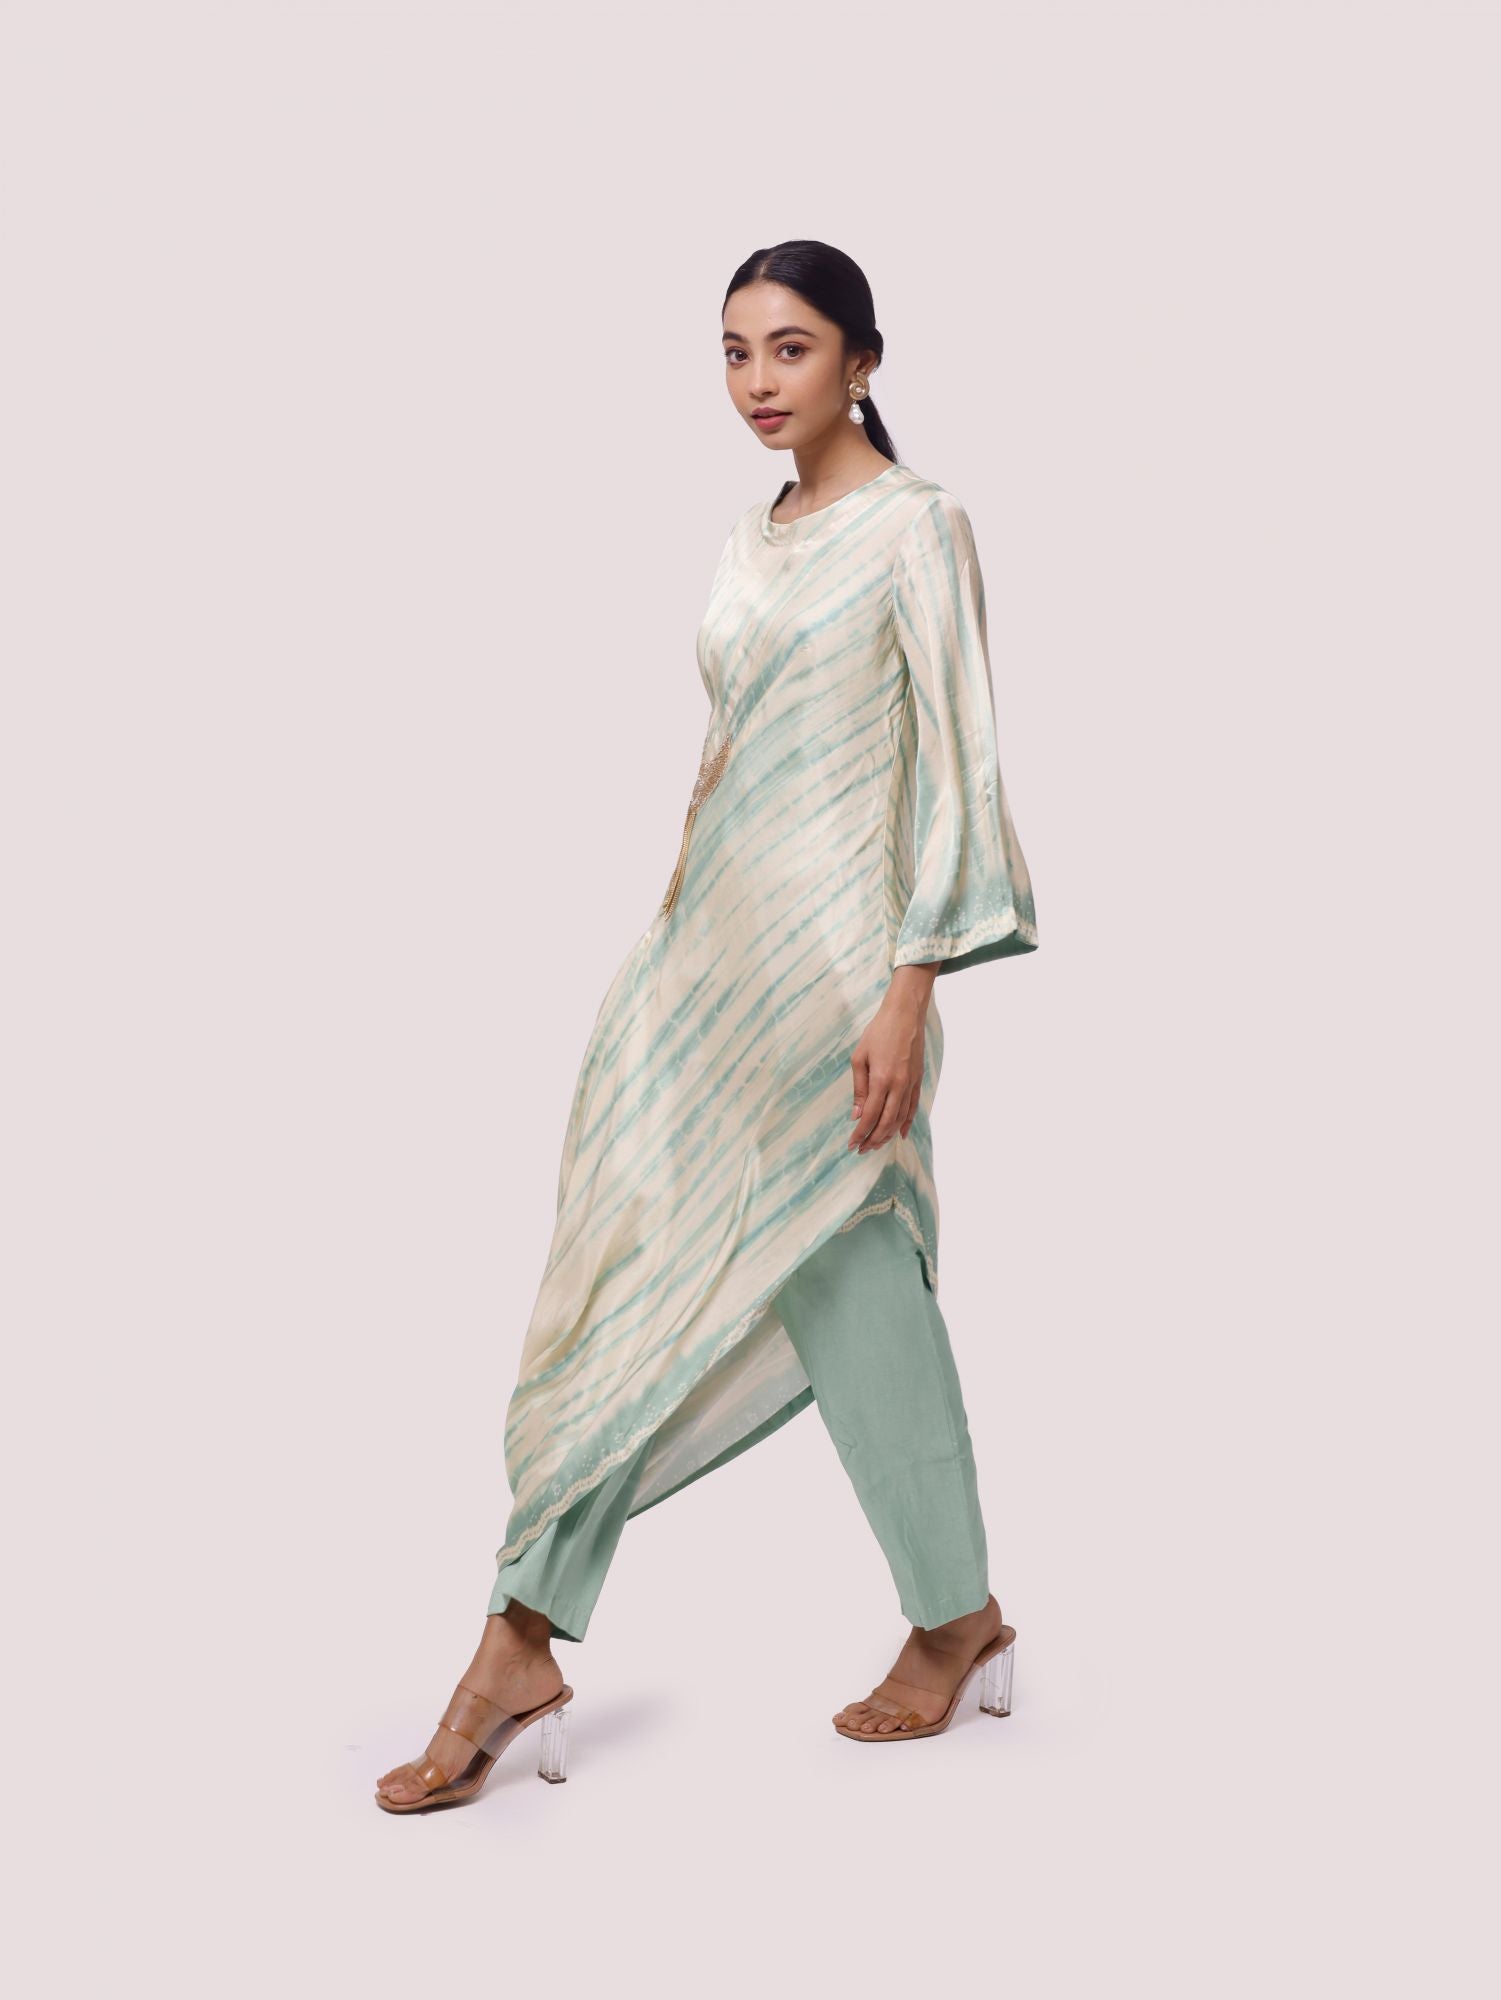 Buy beautiful pista green and cream printed satin kurta set online in USA. Shop the best and latest designs in embroidered sarees, designer sarees, Anarkali suit, lehengas, sharara suits for weddings and special occasions from Pure Elegance Indian fashion store in USA.-suit